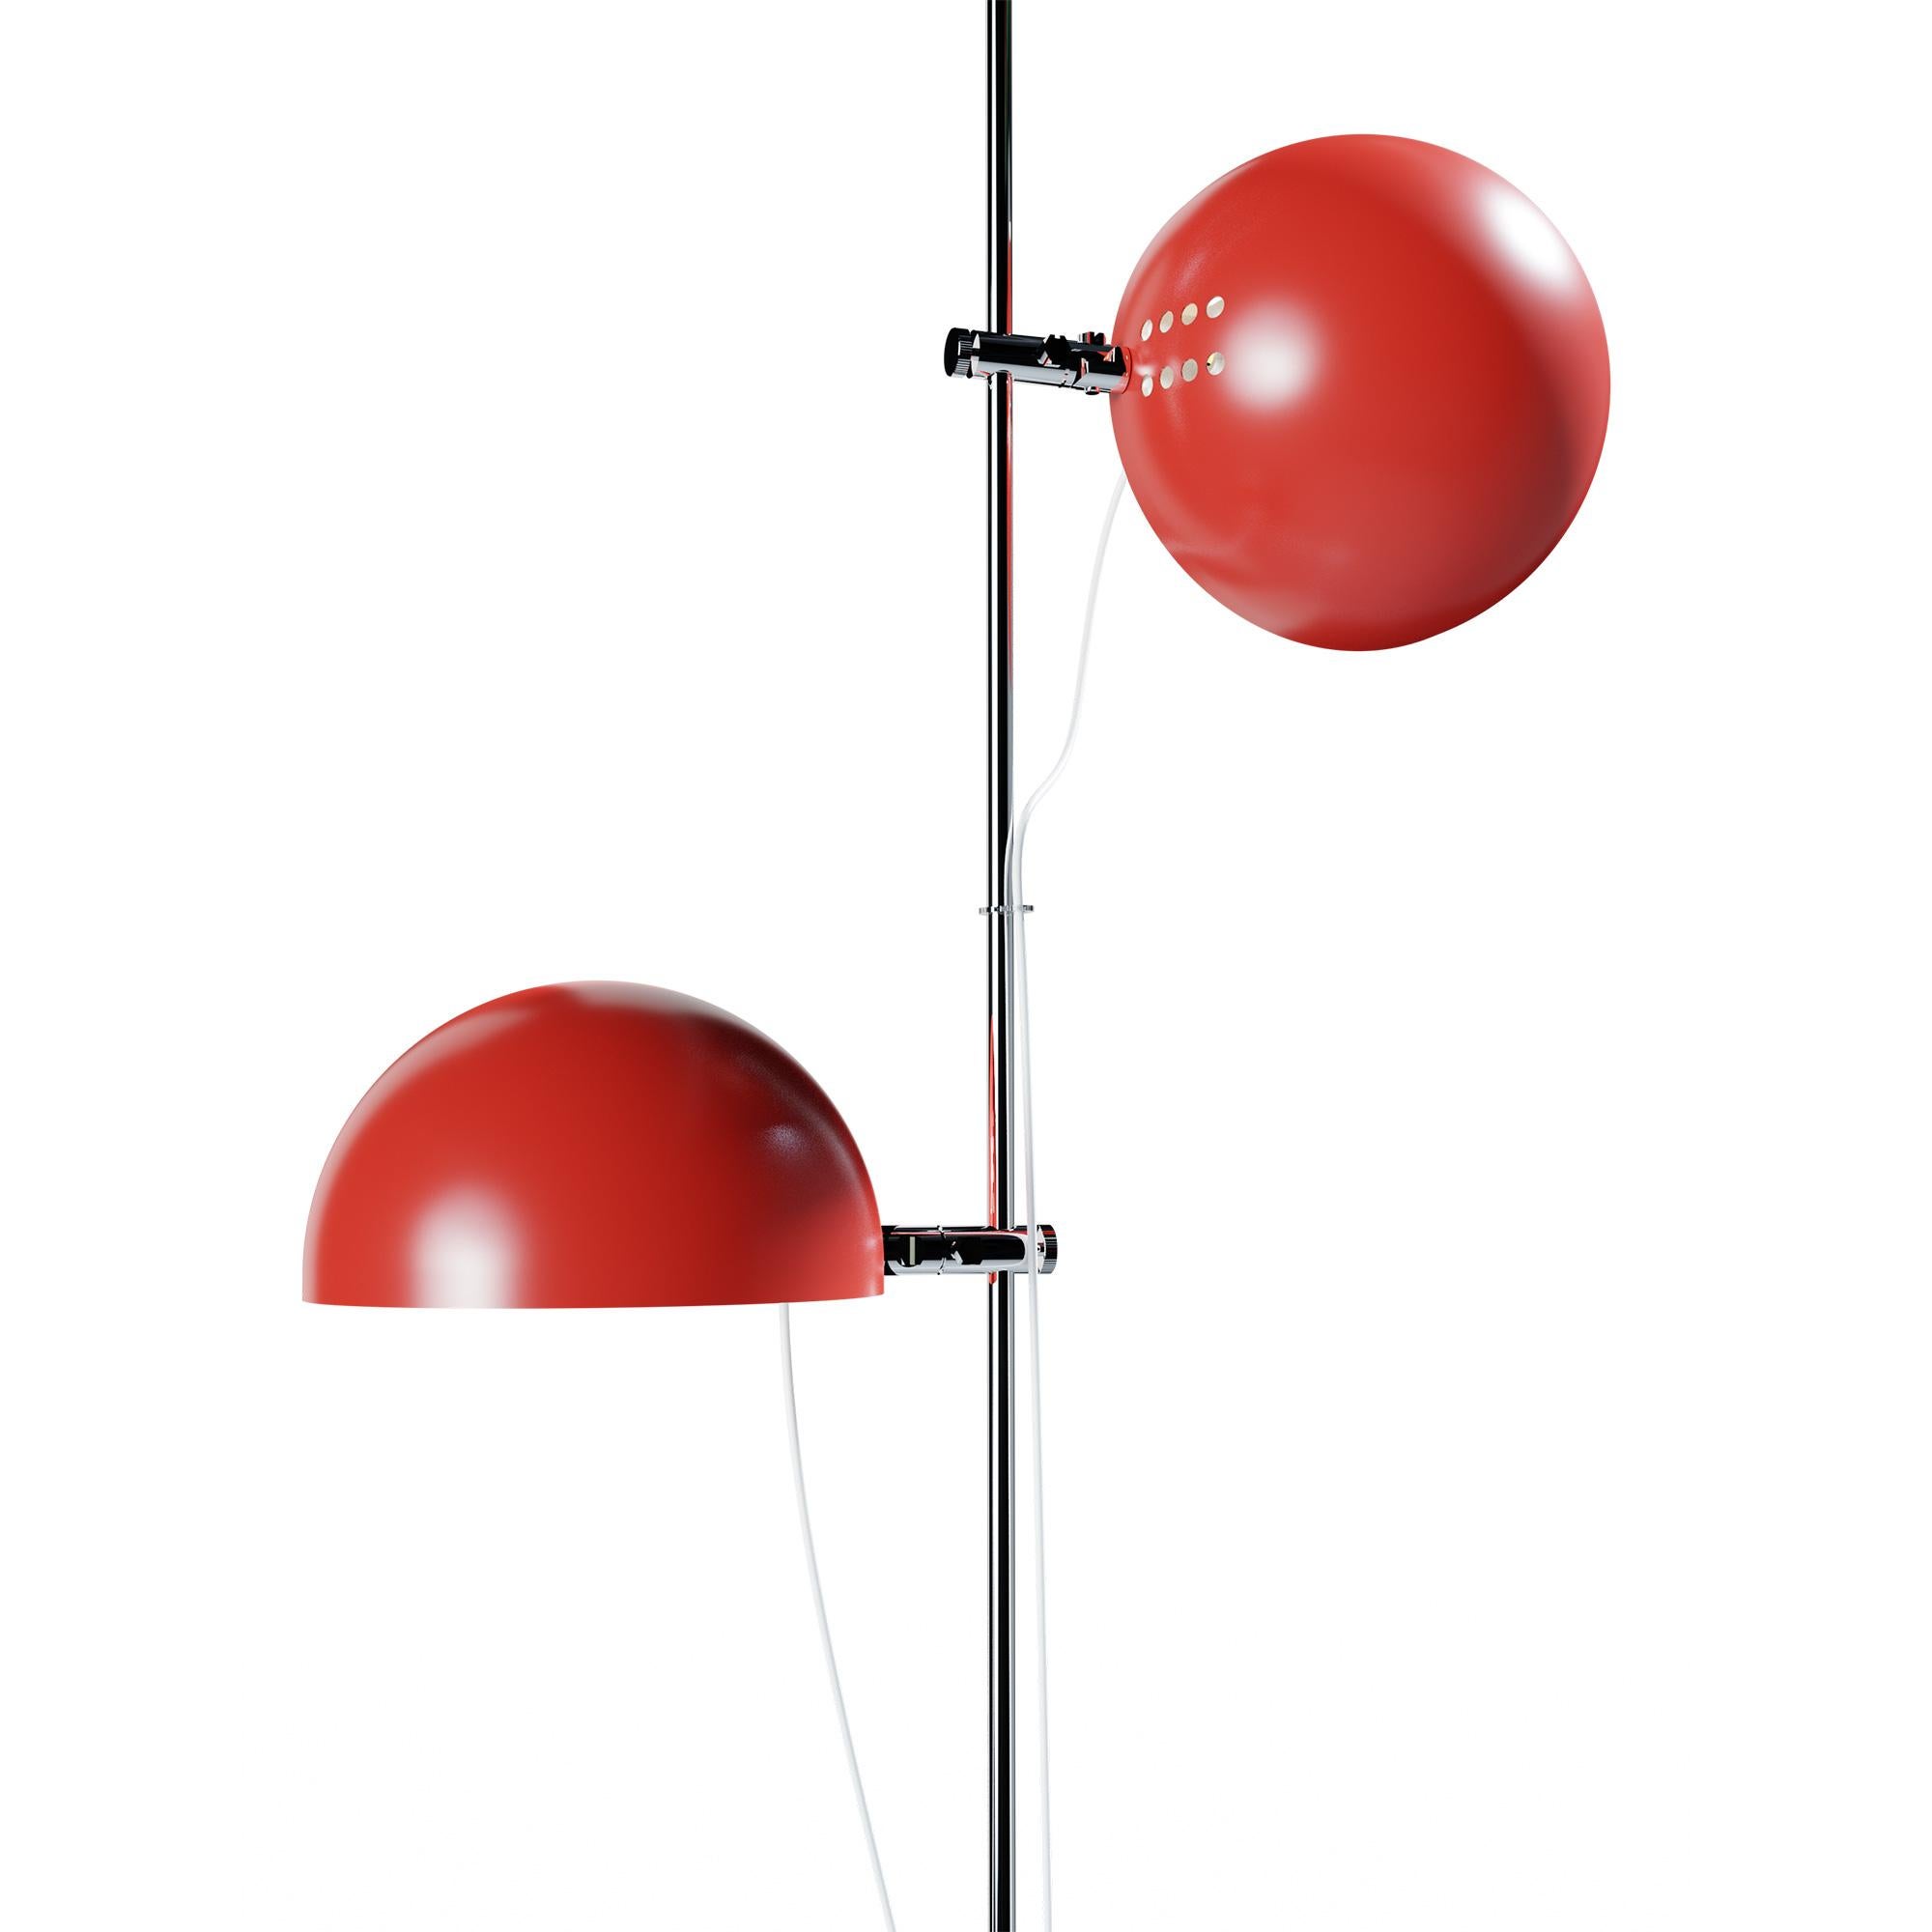 Alain Richard 'A23' metal and marble floor lamp for Disderot in Red.

Executed in red painted metal with a marble base, this newly produced numbered edition with included certificate of authenticity is made in France by Disderot with many of the